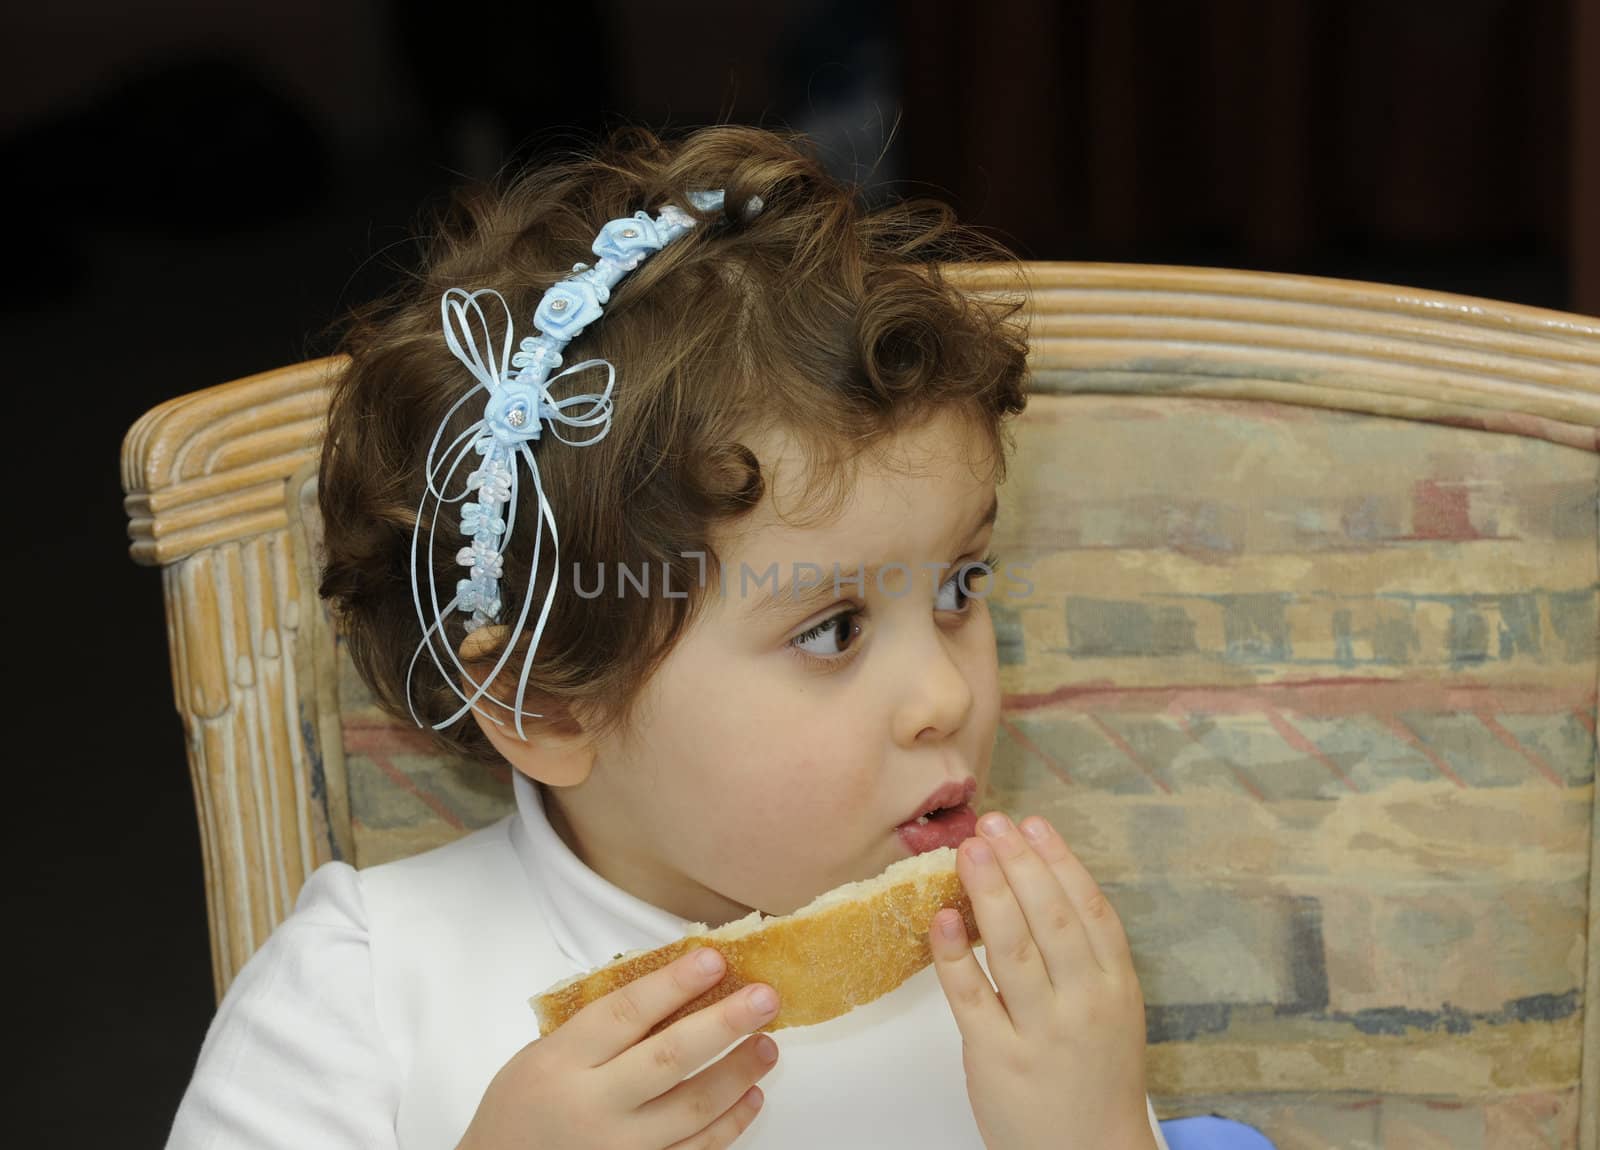 smiling young flower girl at a wedding eating some bread